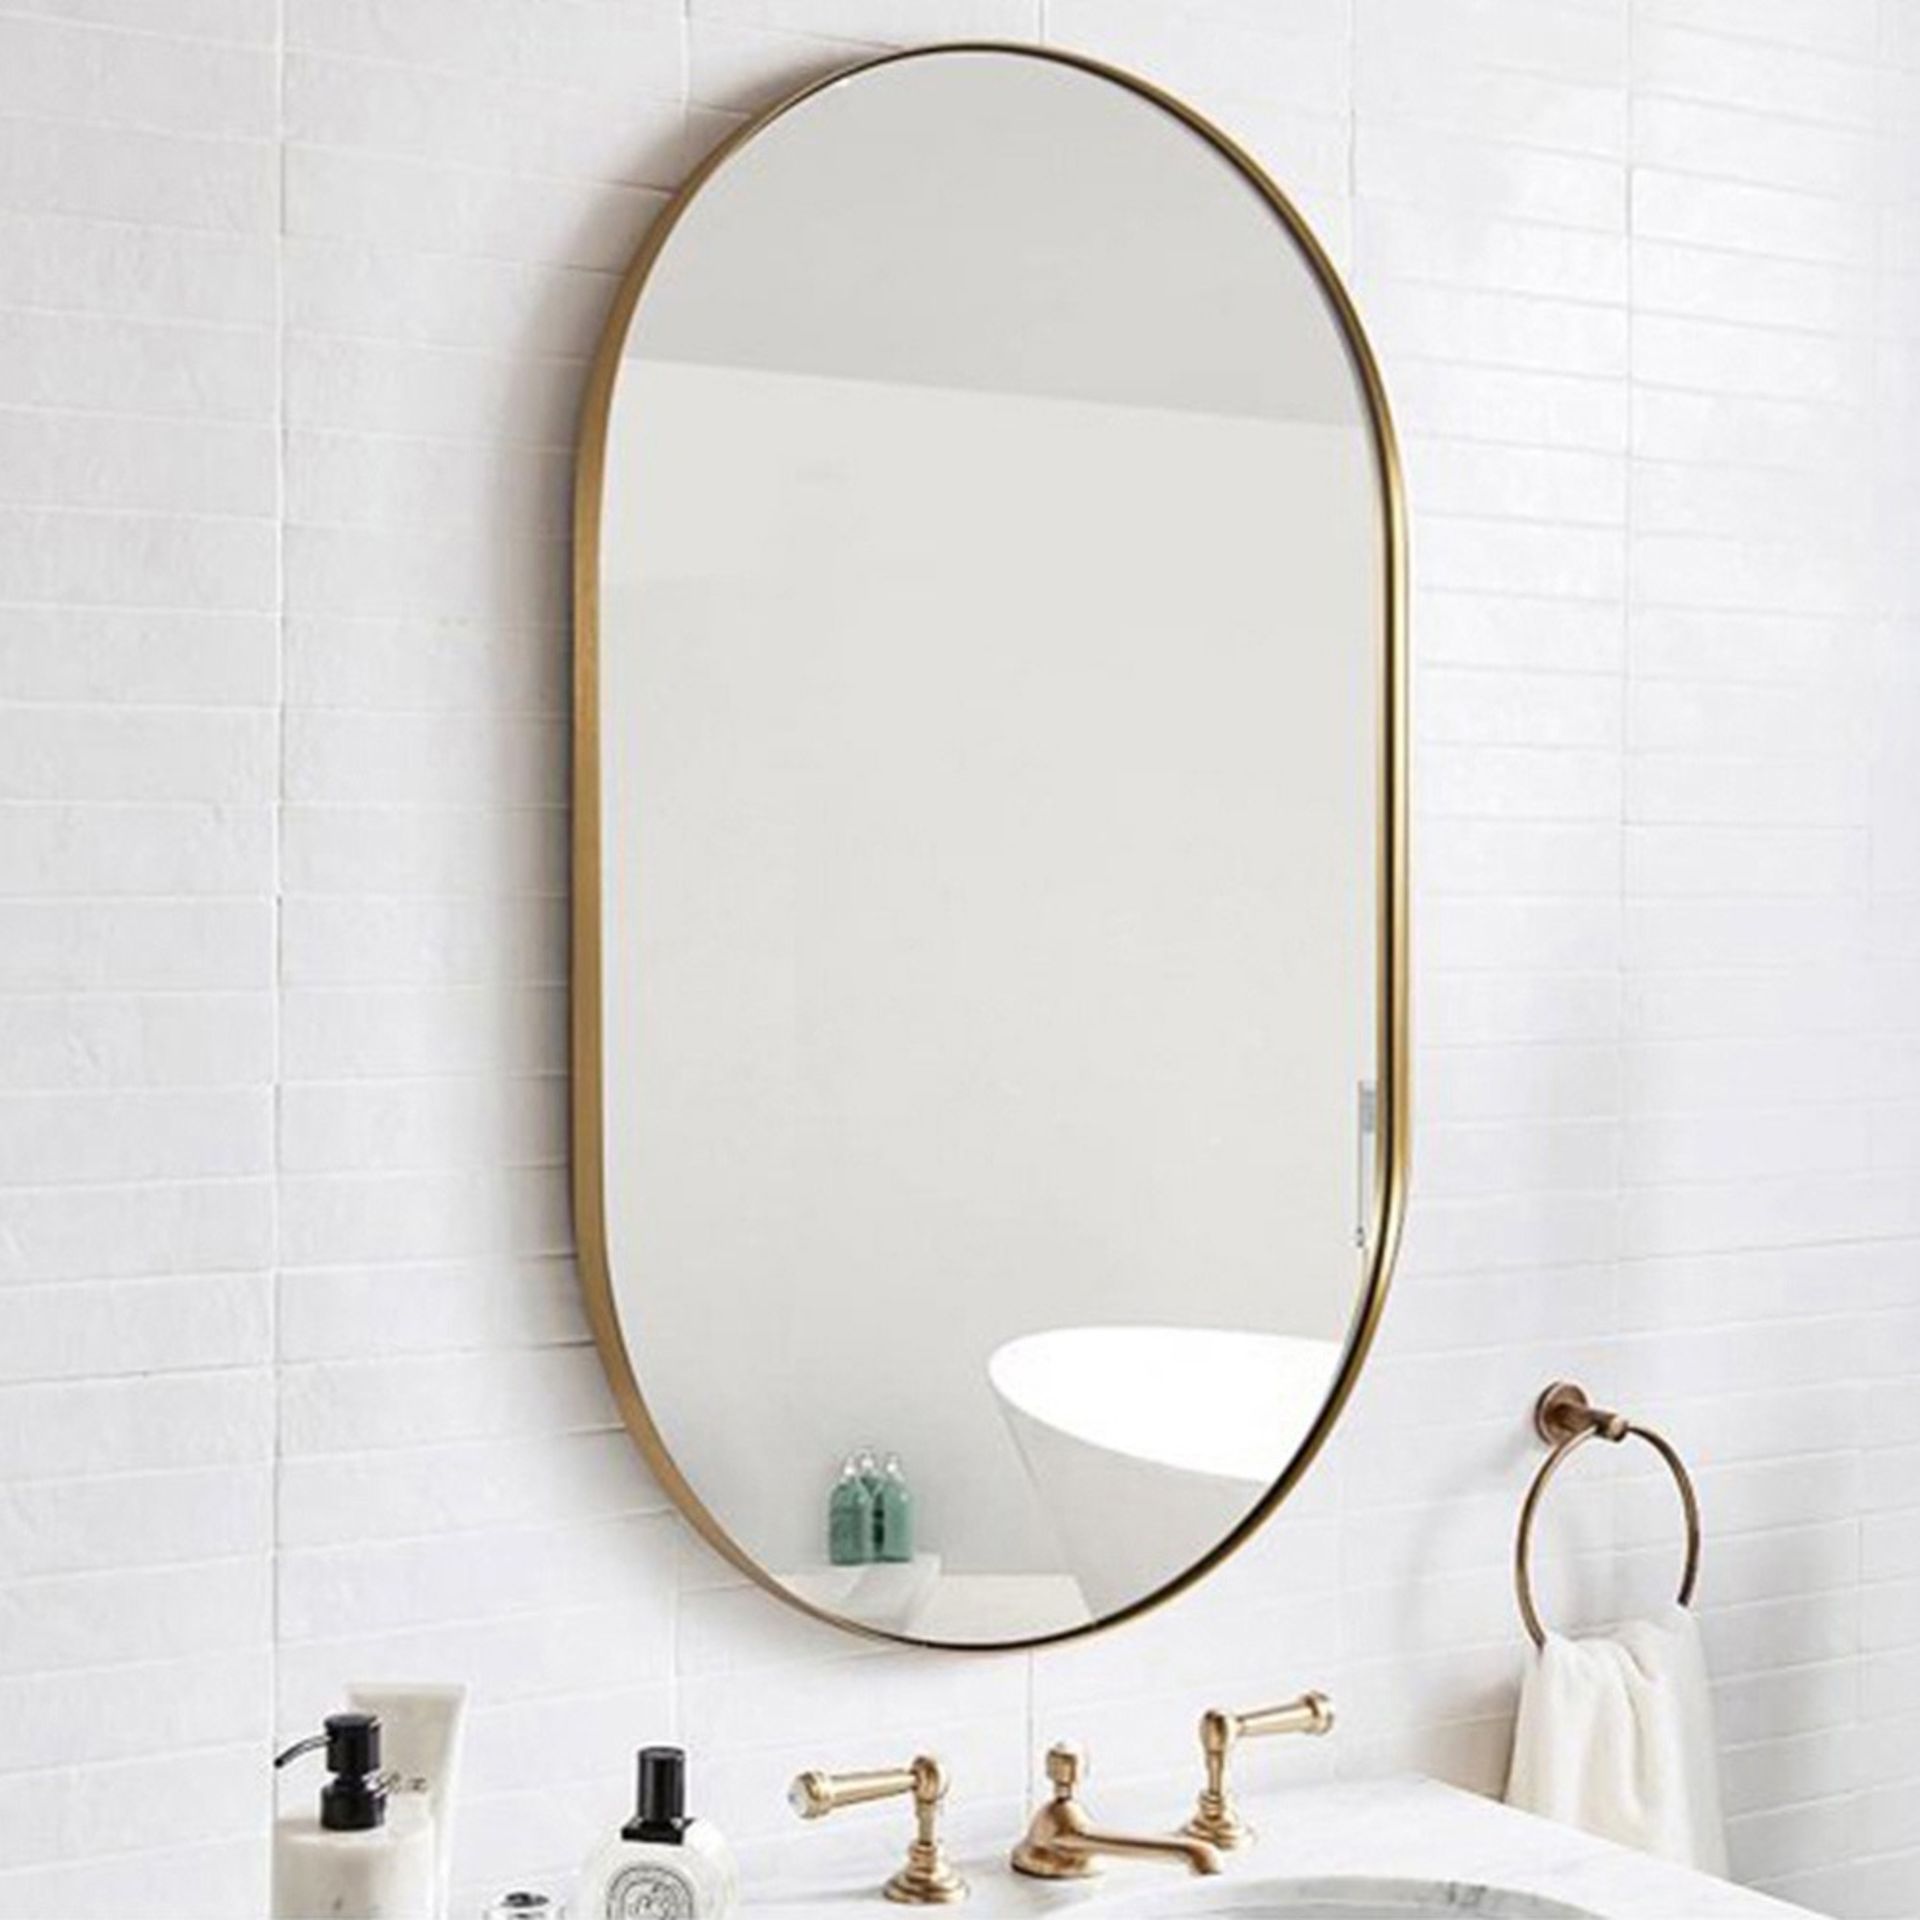 Living And Home Oval Wall Mount Vanity Mirror 40 x 70cm - ER47